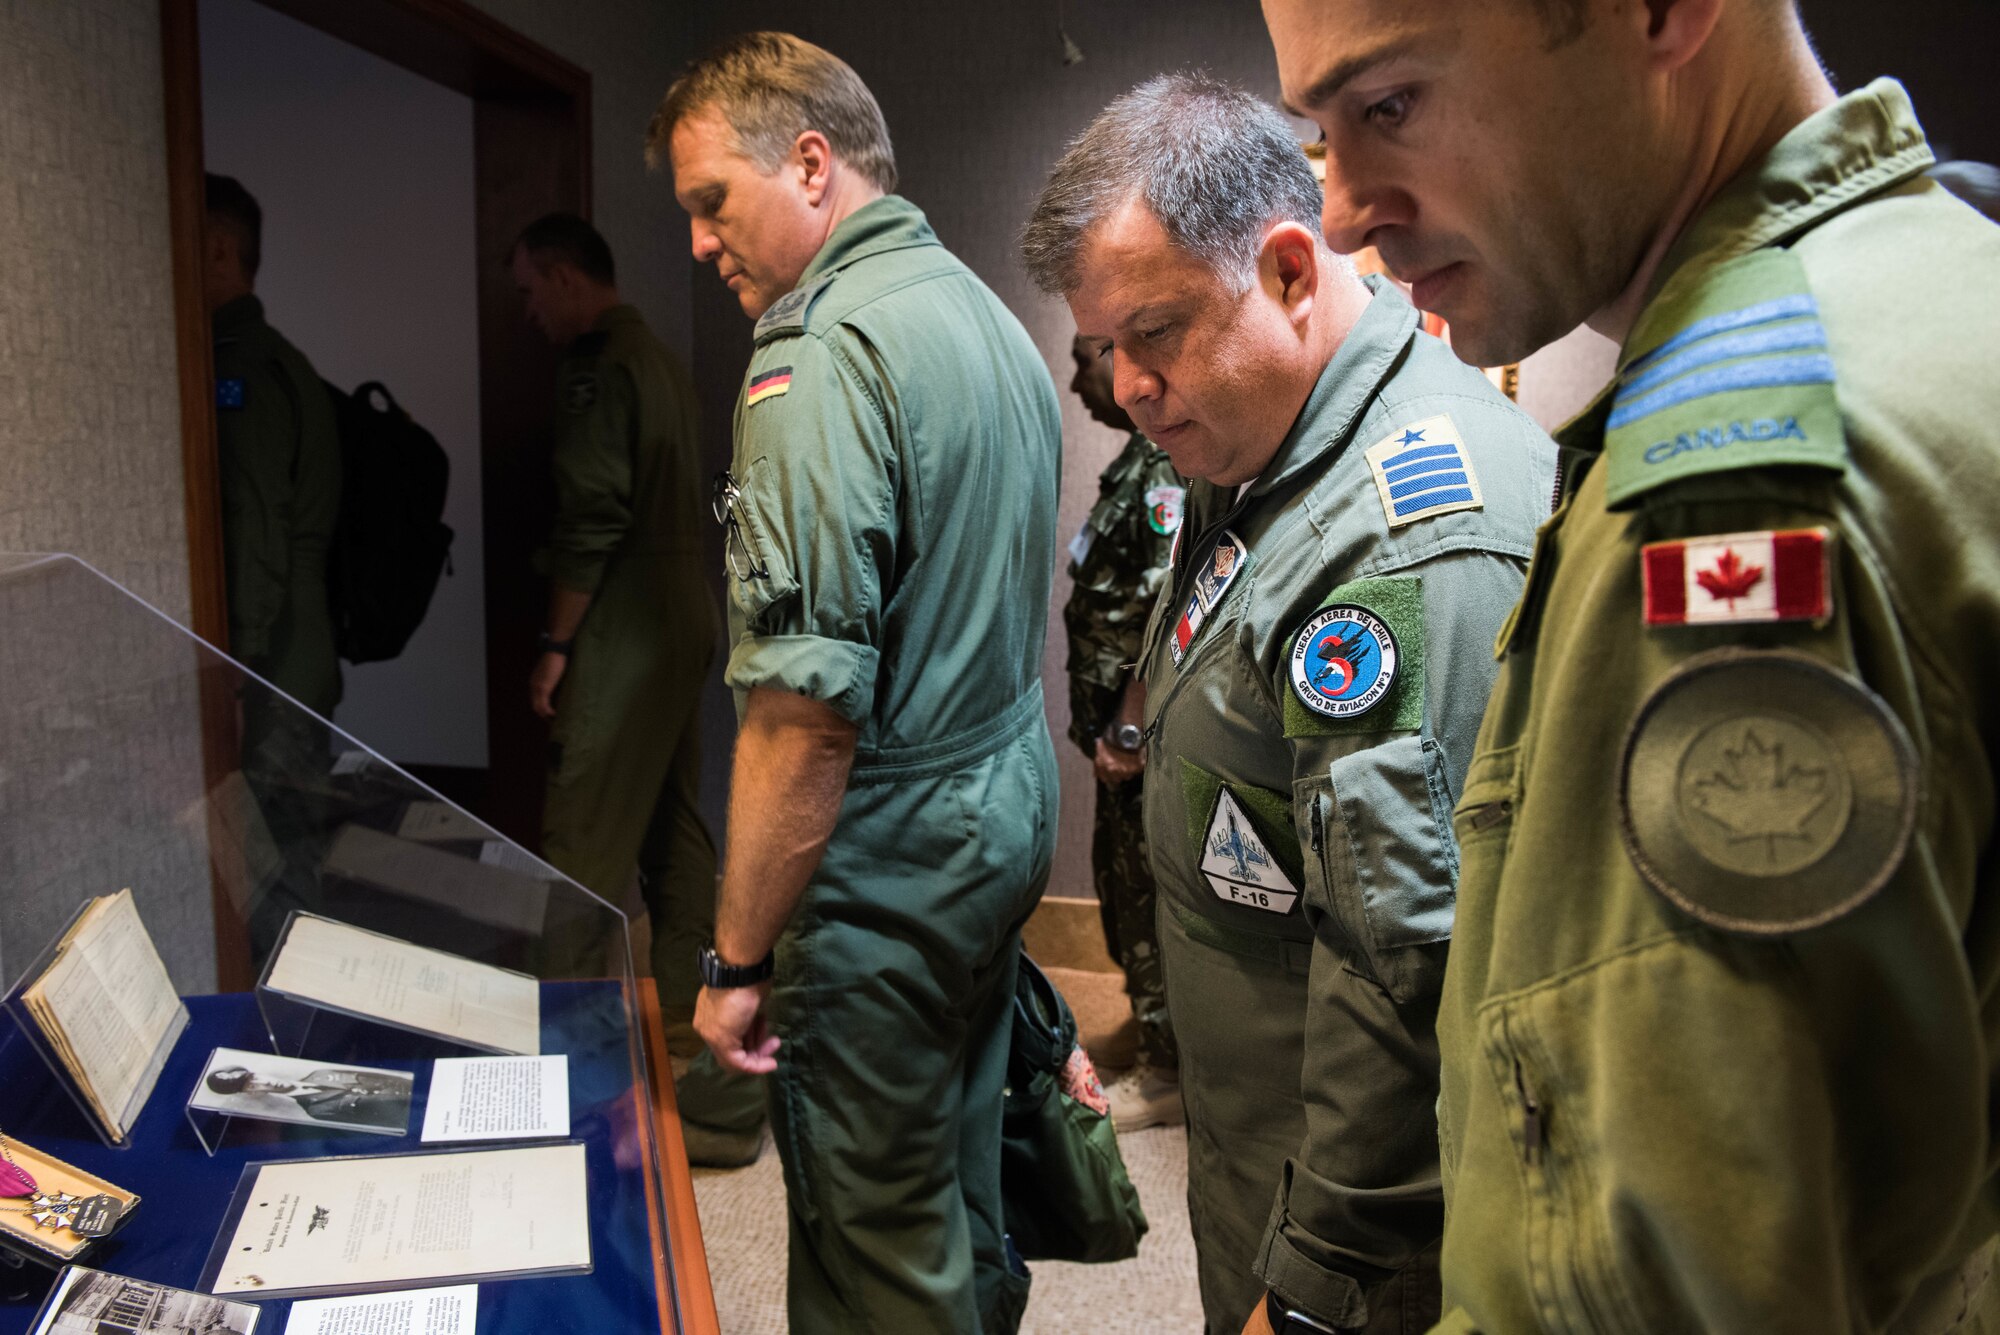 Foreign attaché members look at historical Pacific Air Forces (PACAF) photos and artifacts before entering the Kenney Conference Room at Headquarters PACAF during a tour of Joint Base Pearl Harbor-Hickam, Hawaii, Oct. 23, 2018.